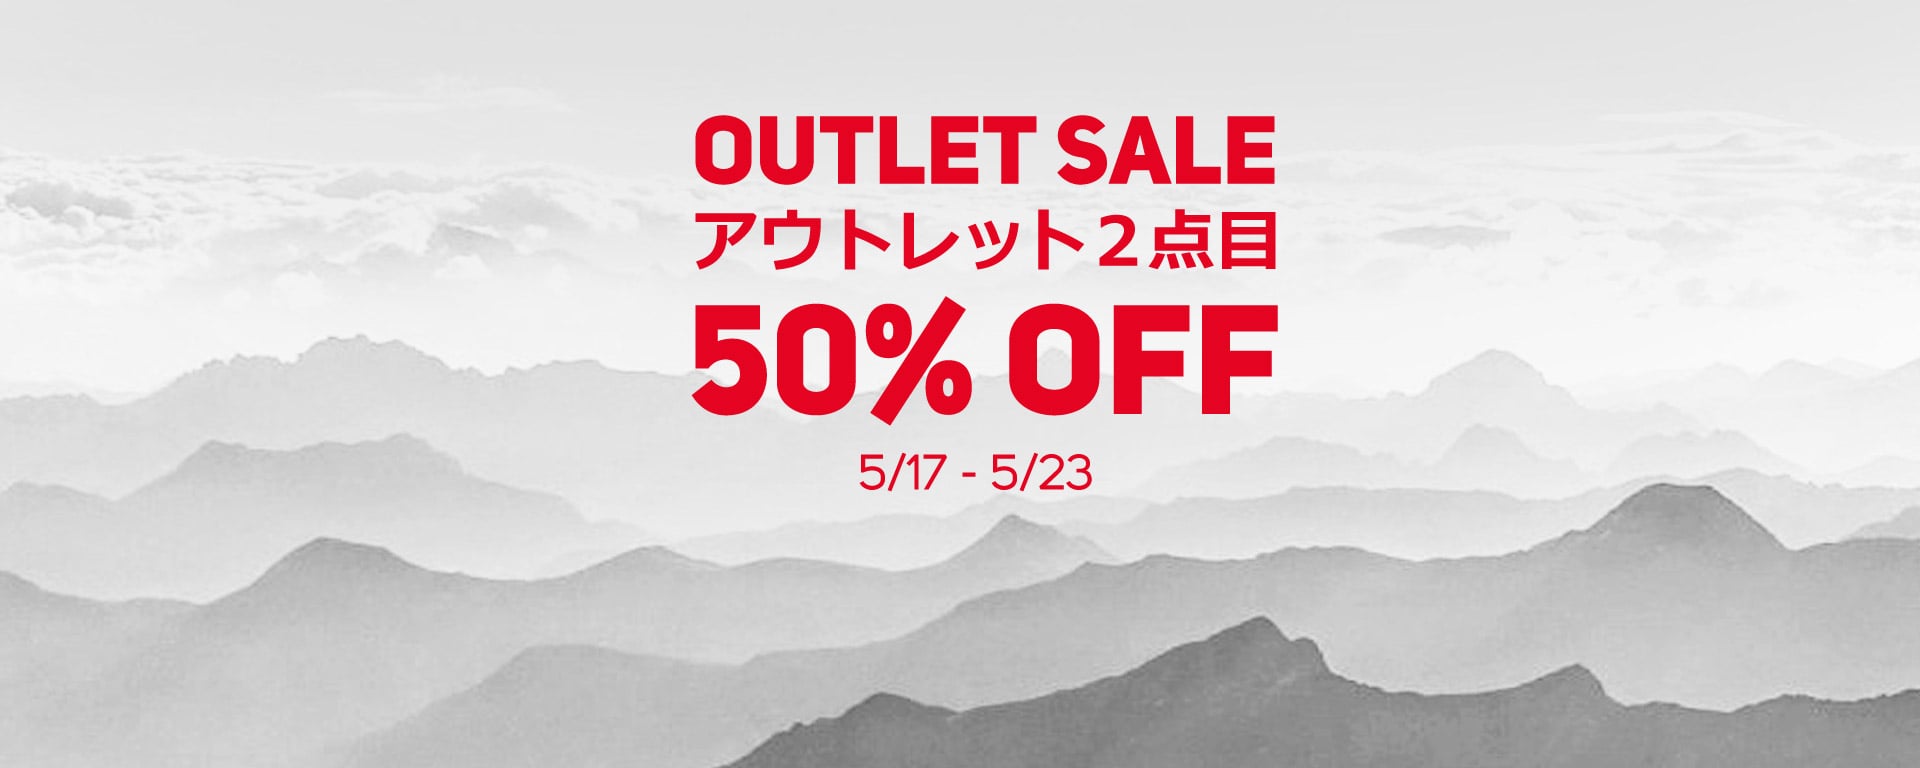 Outlet 2 buy for 50%off